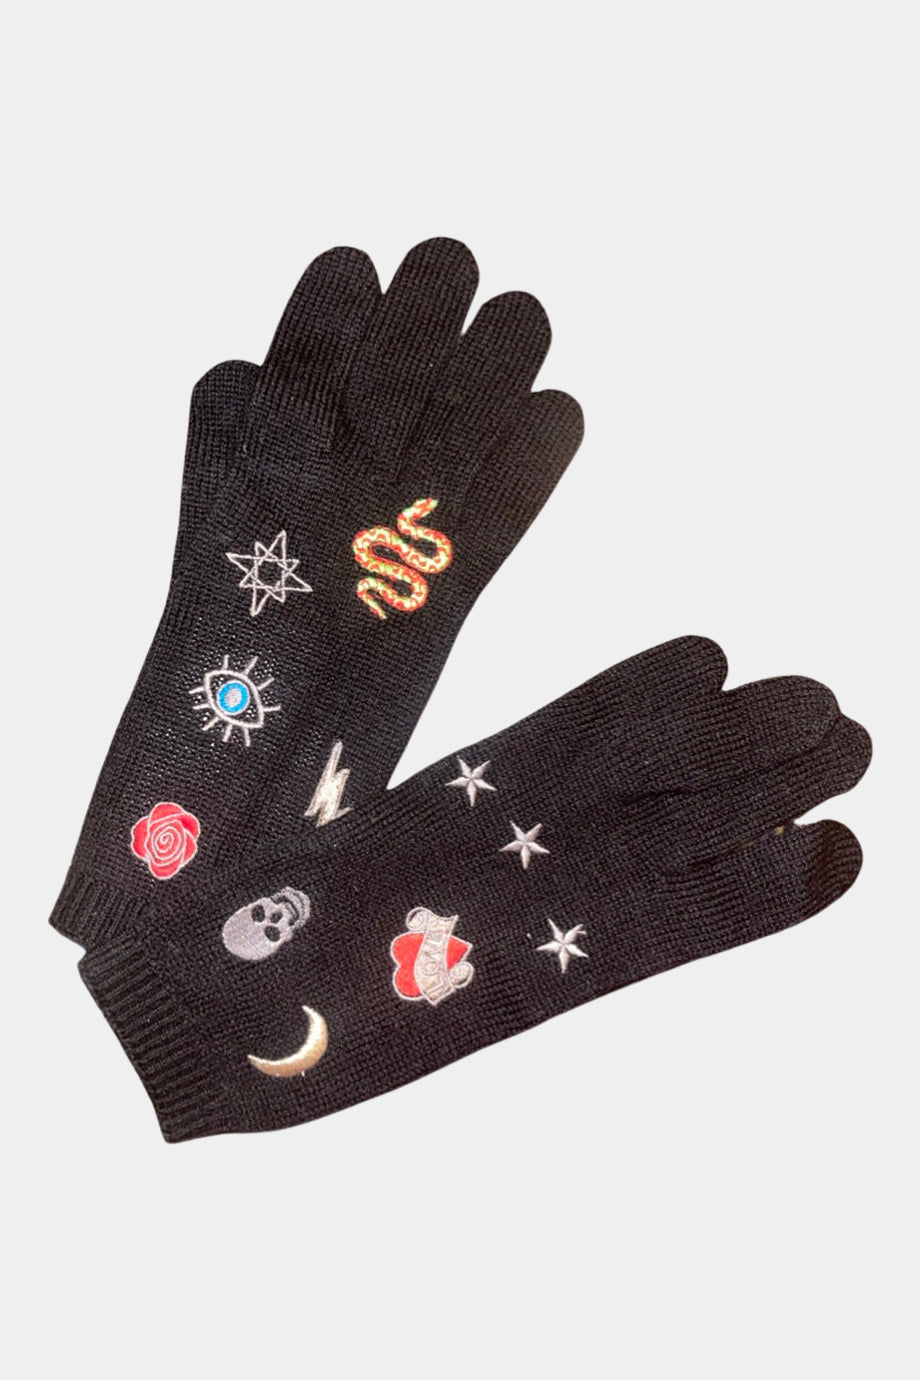 Merino Finger Gloves with Mixed Patches